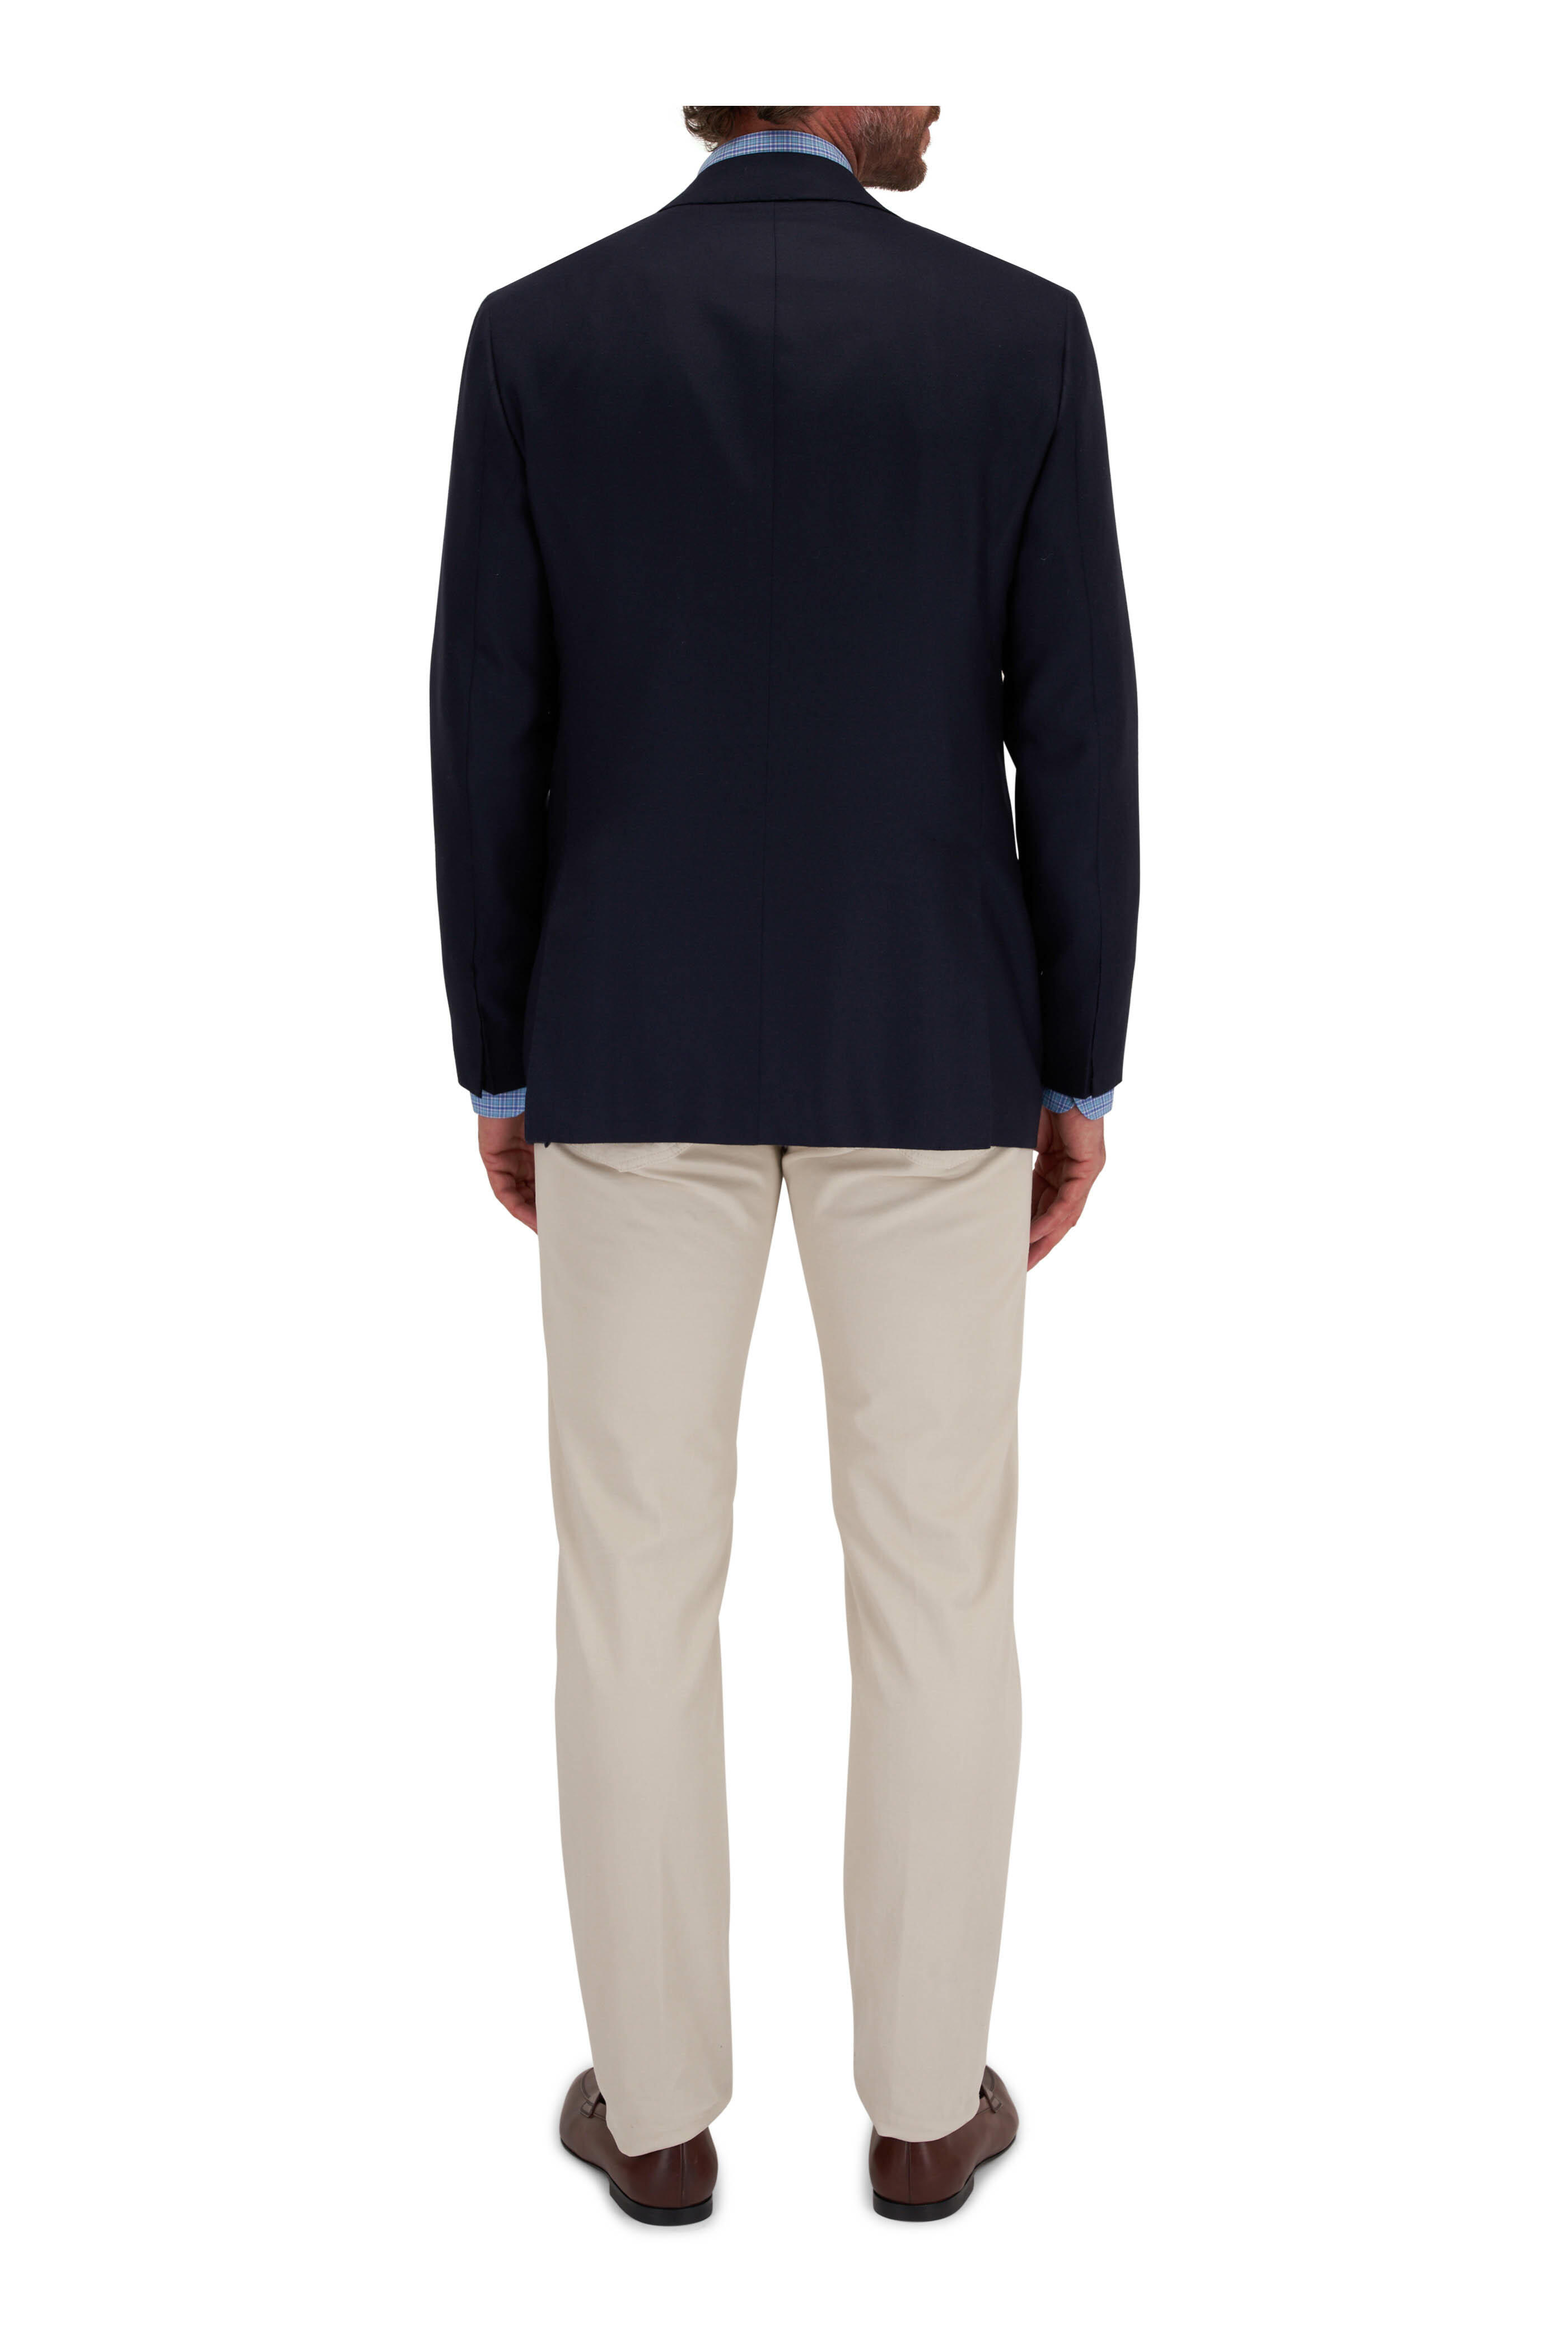 Kiton - Solid Blue Cashmere Sportcoat | Mitchell Stores